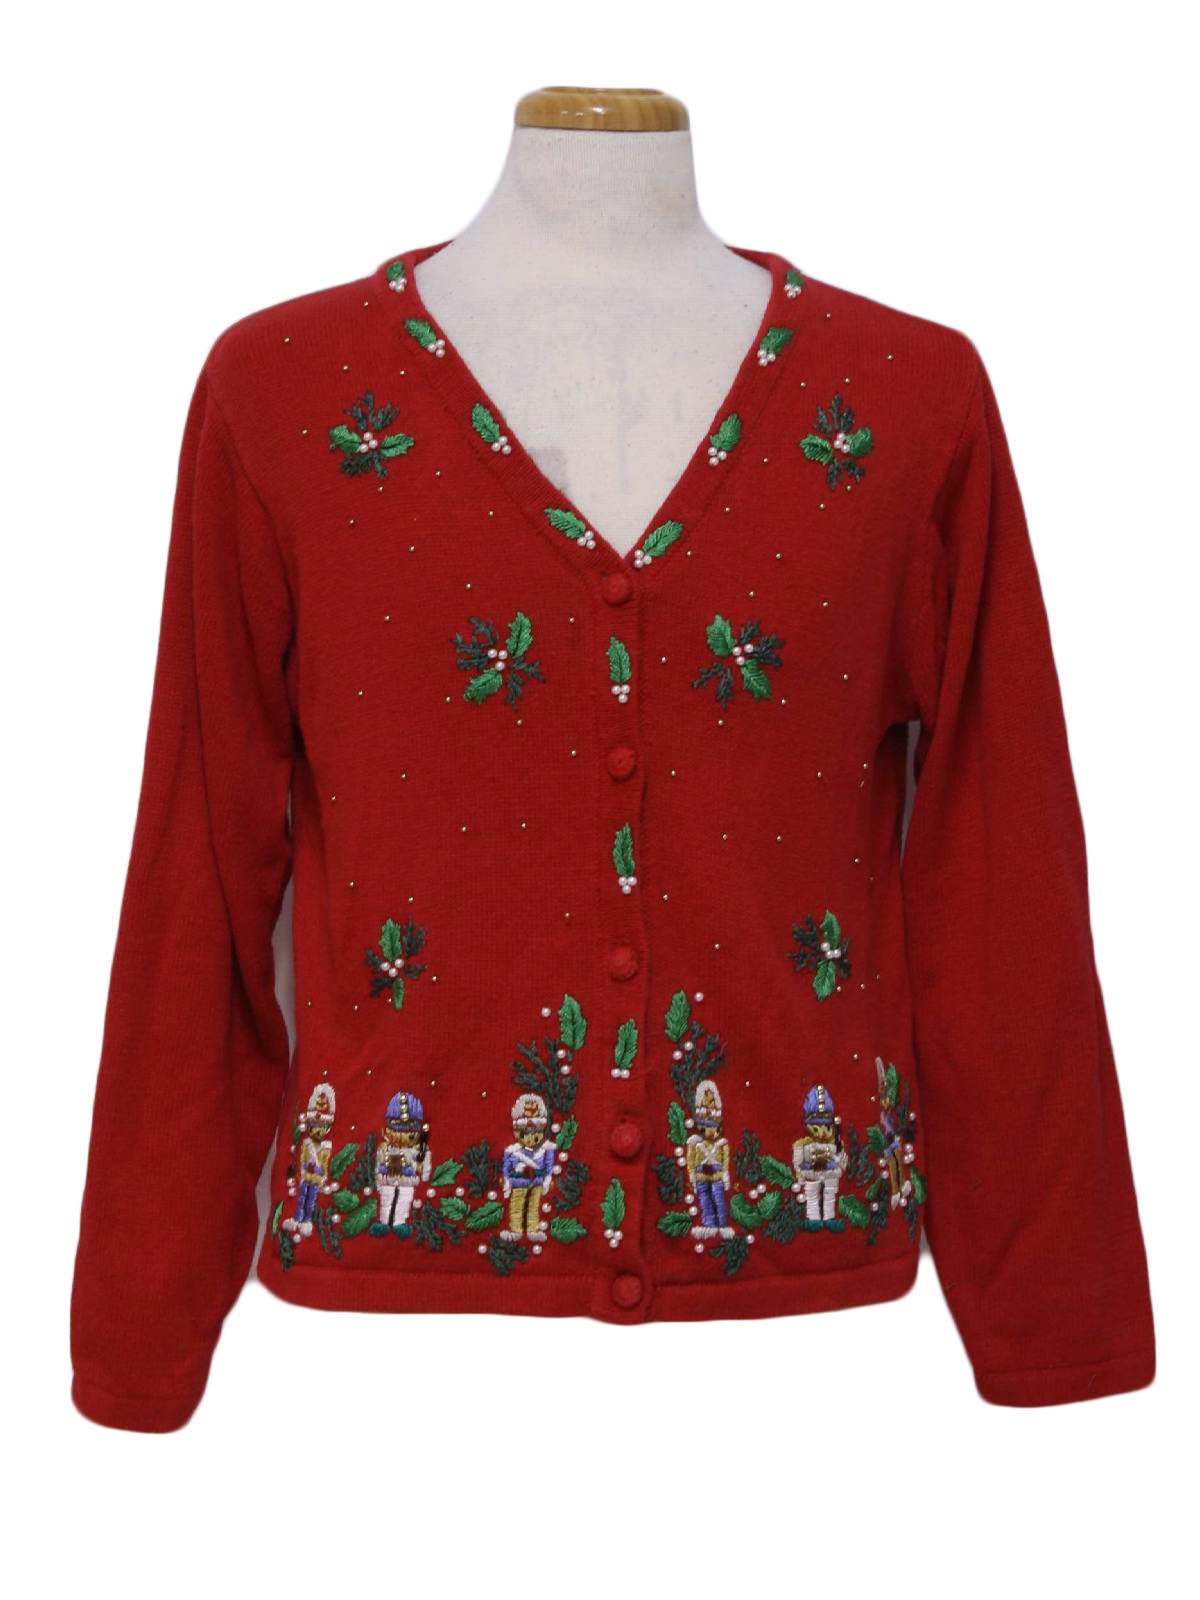 Womens Ugly Christmas Cardigan Sweater: -BP Design- Womens red ...